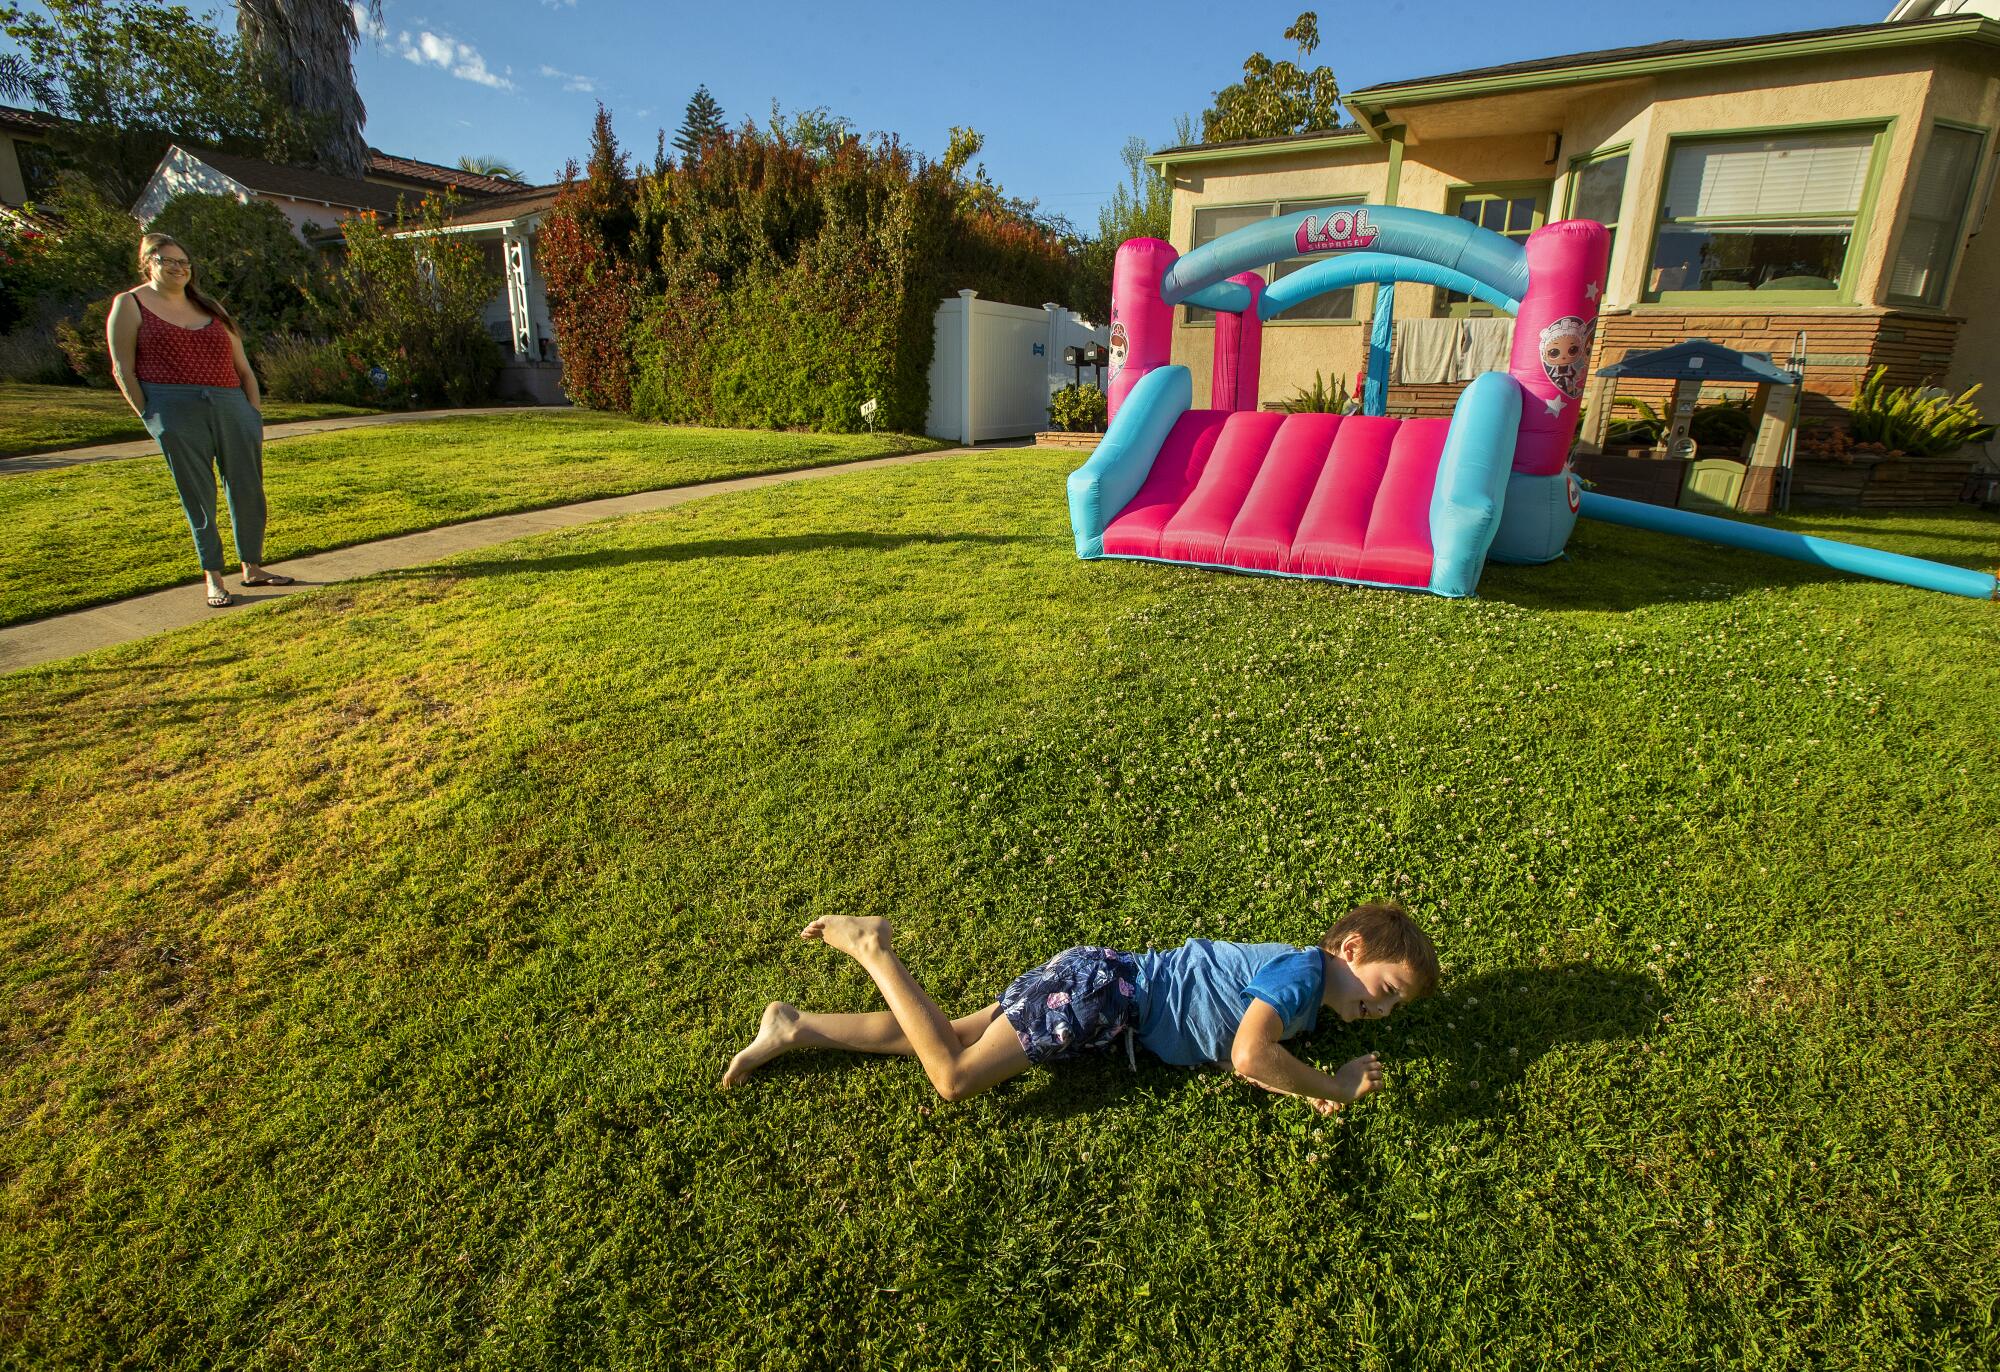 Jay Bass, 6, rolls over and over while playing on a front lawn